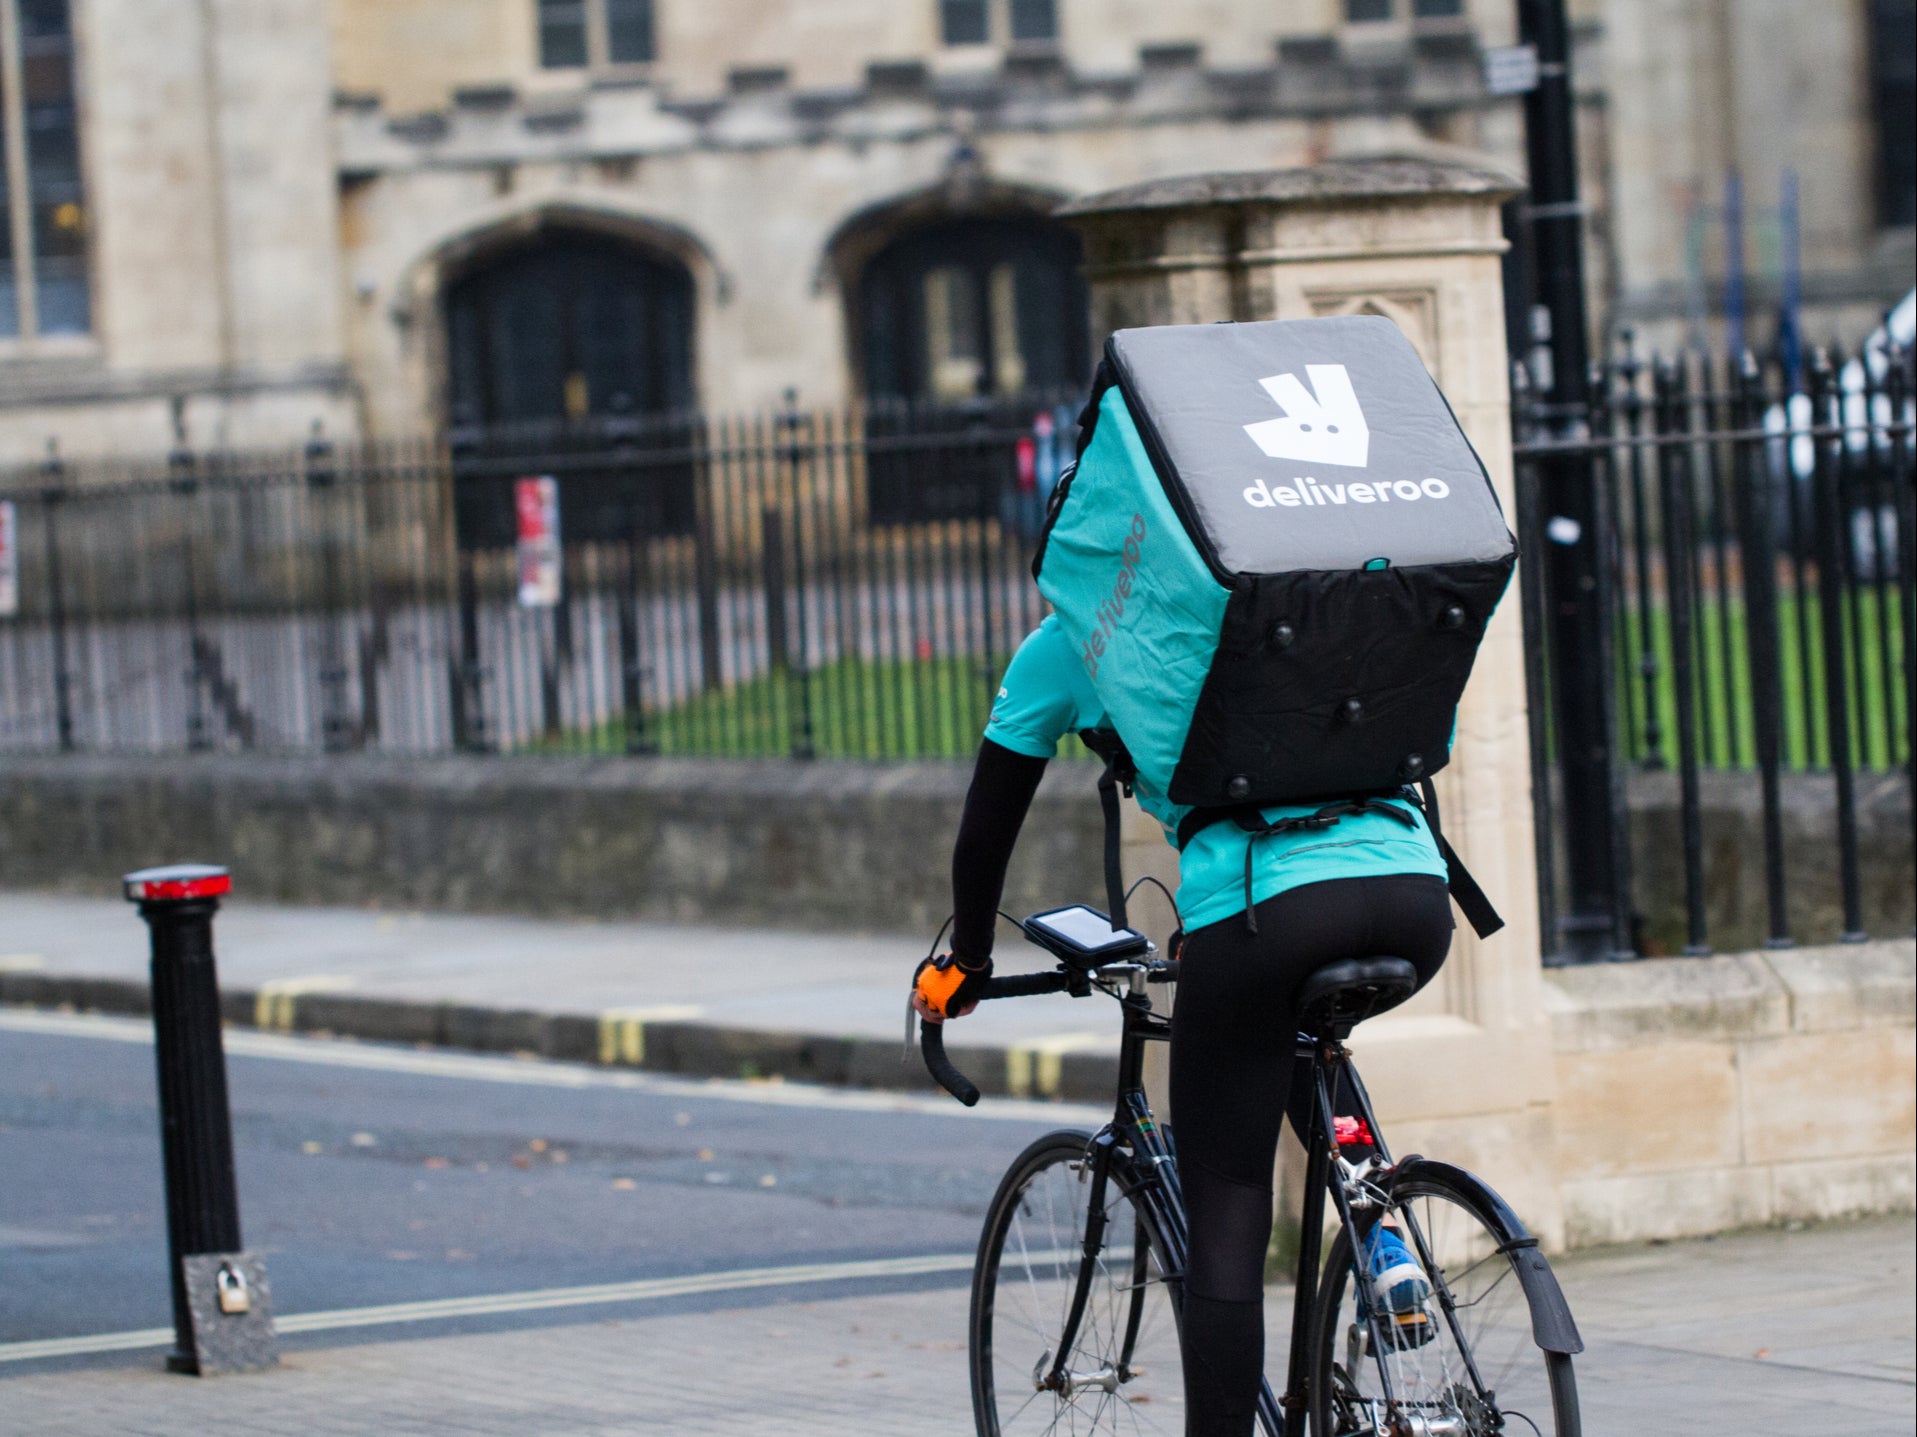 A Deliveroo rider on a bicycle